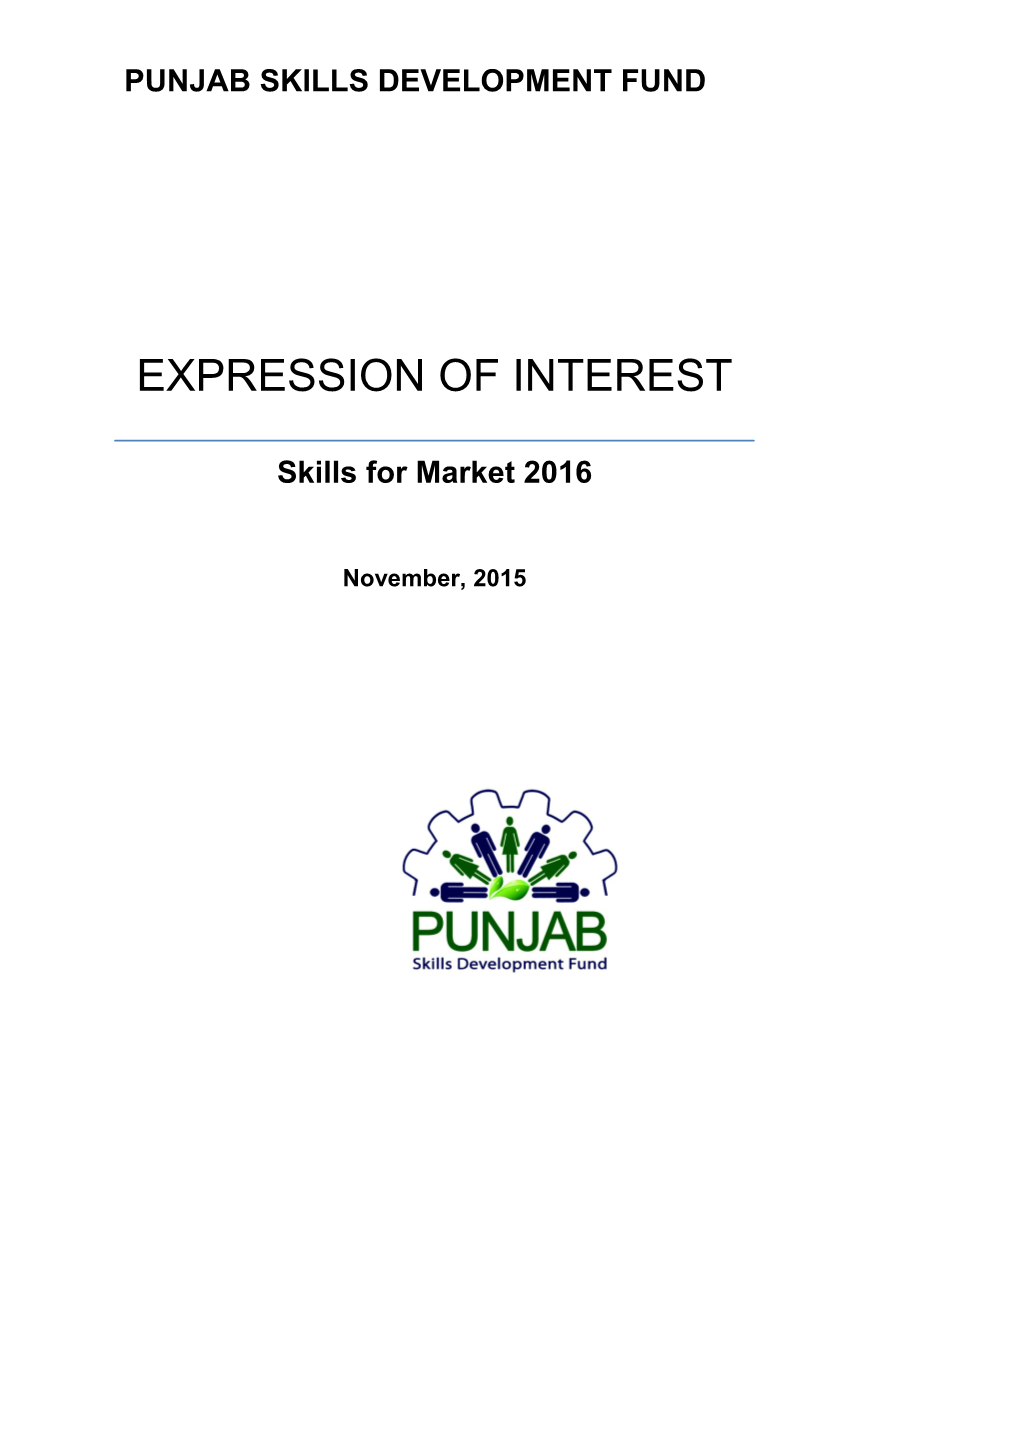 Expression of Interest s6